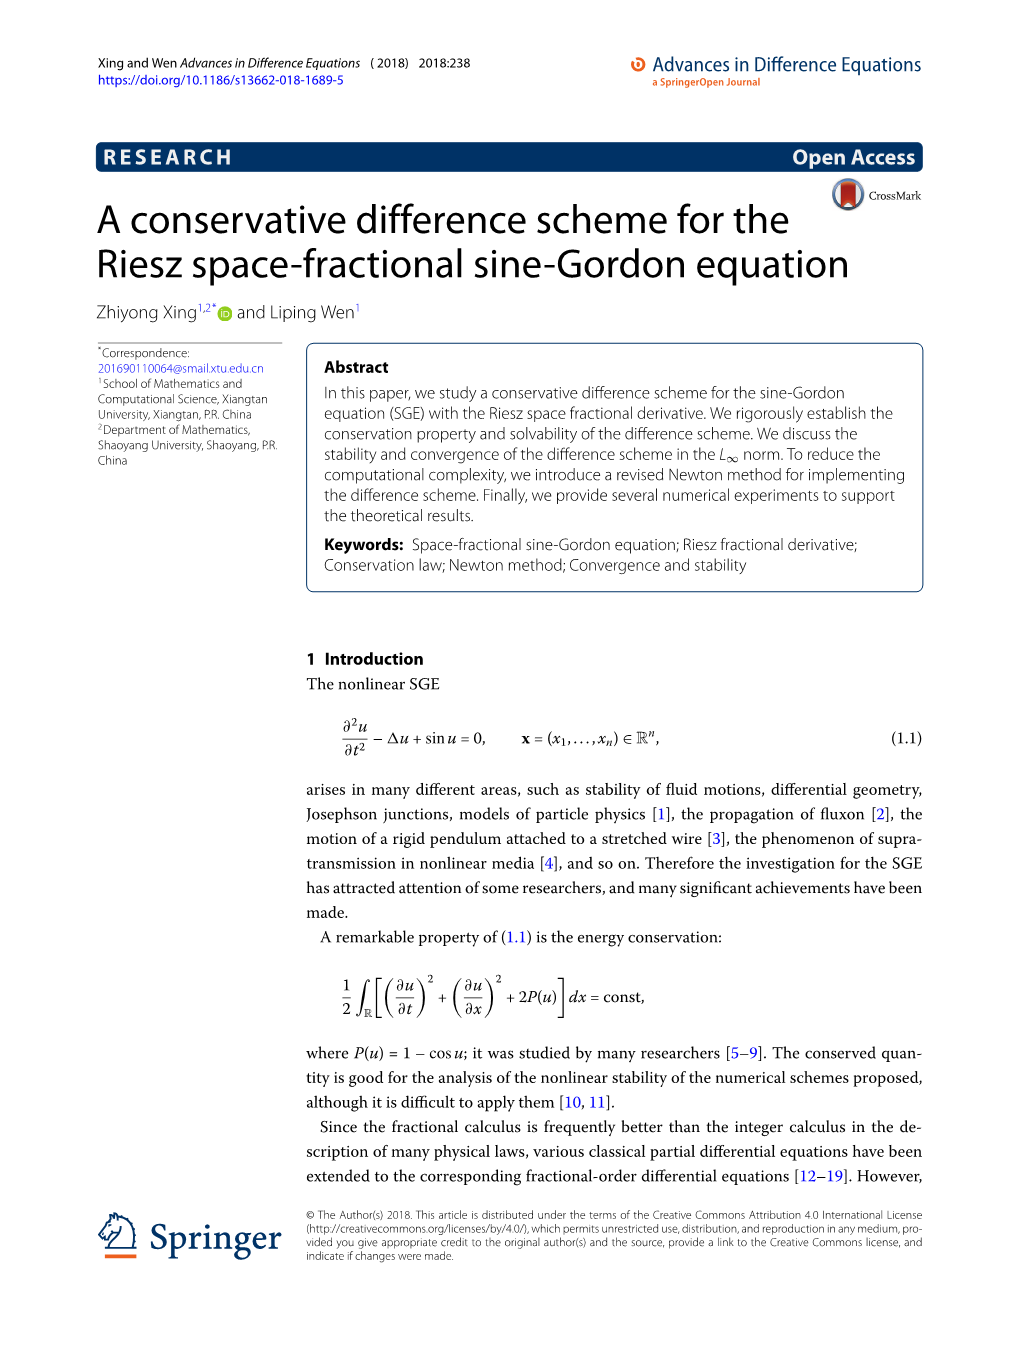 A Conservative Difference Scheme for the Riesz Space-Fractional Sine-Gordon Equation Zhiyong Xing1,2* and Liping Wen1